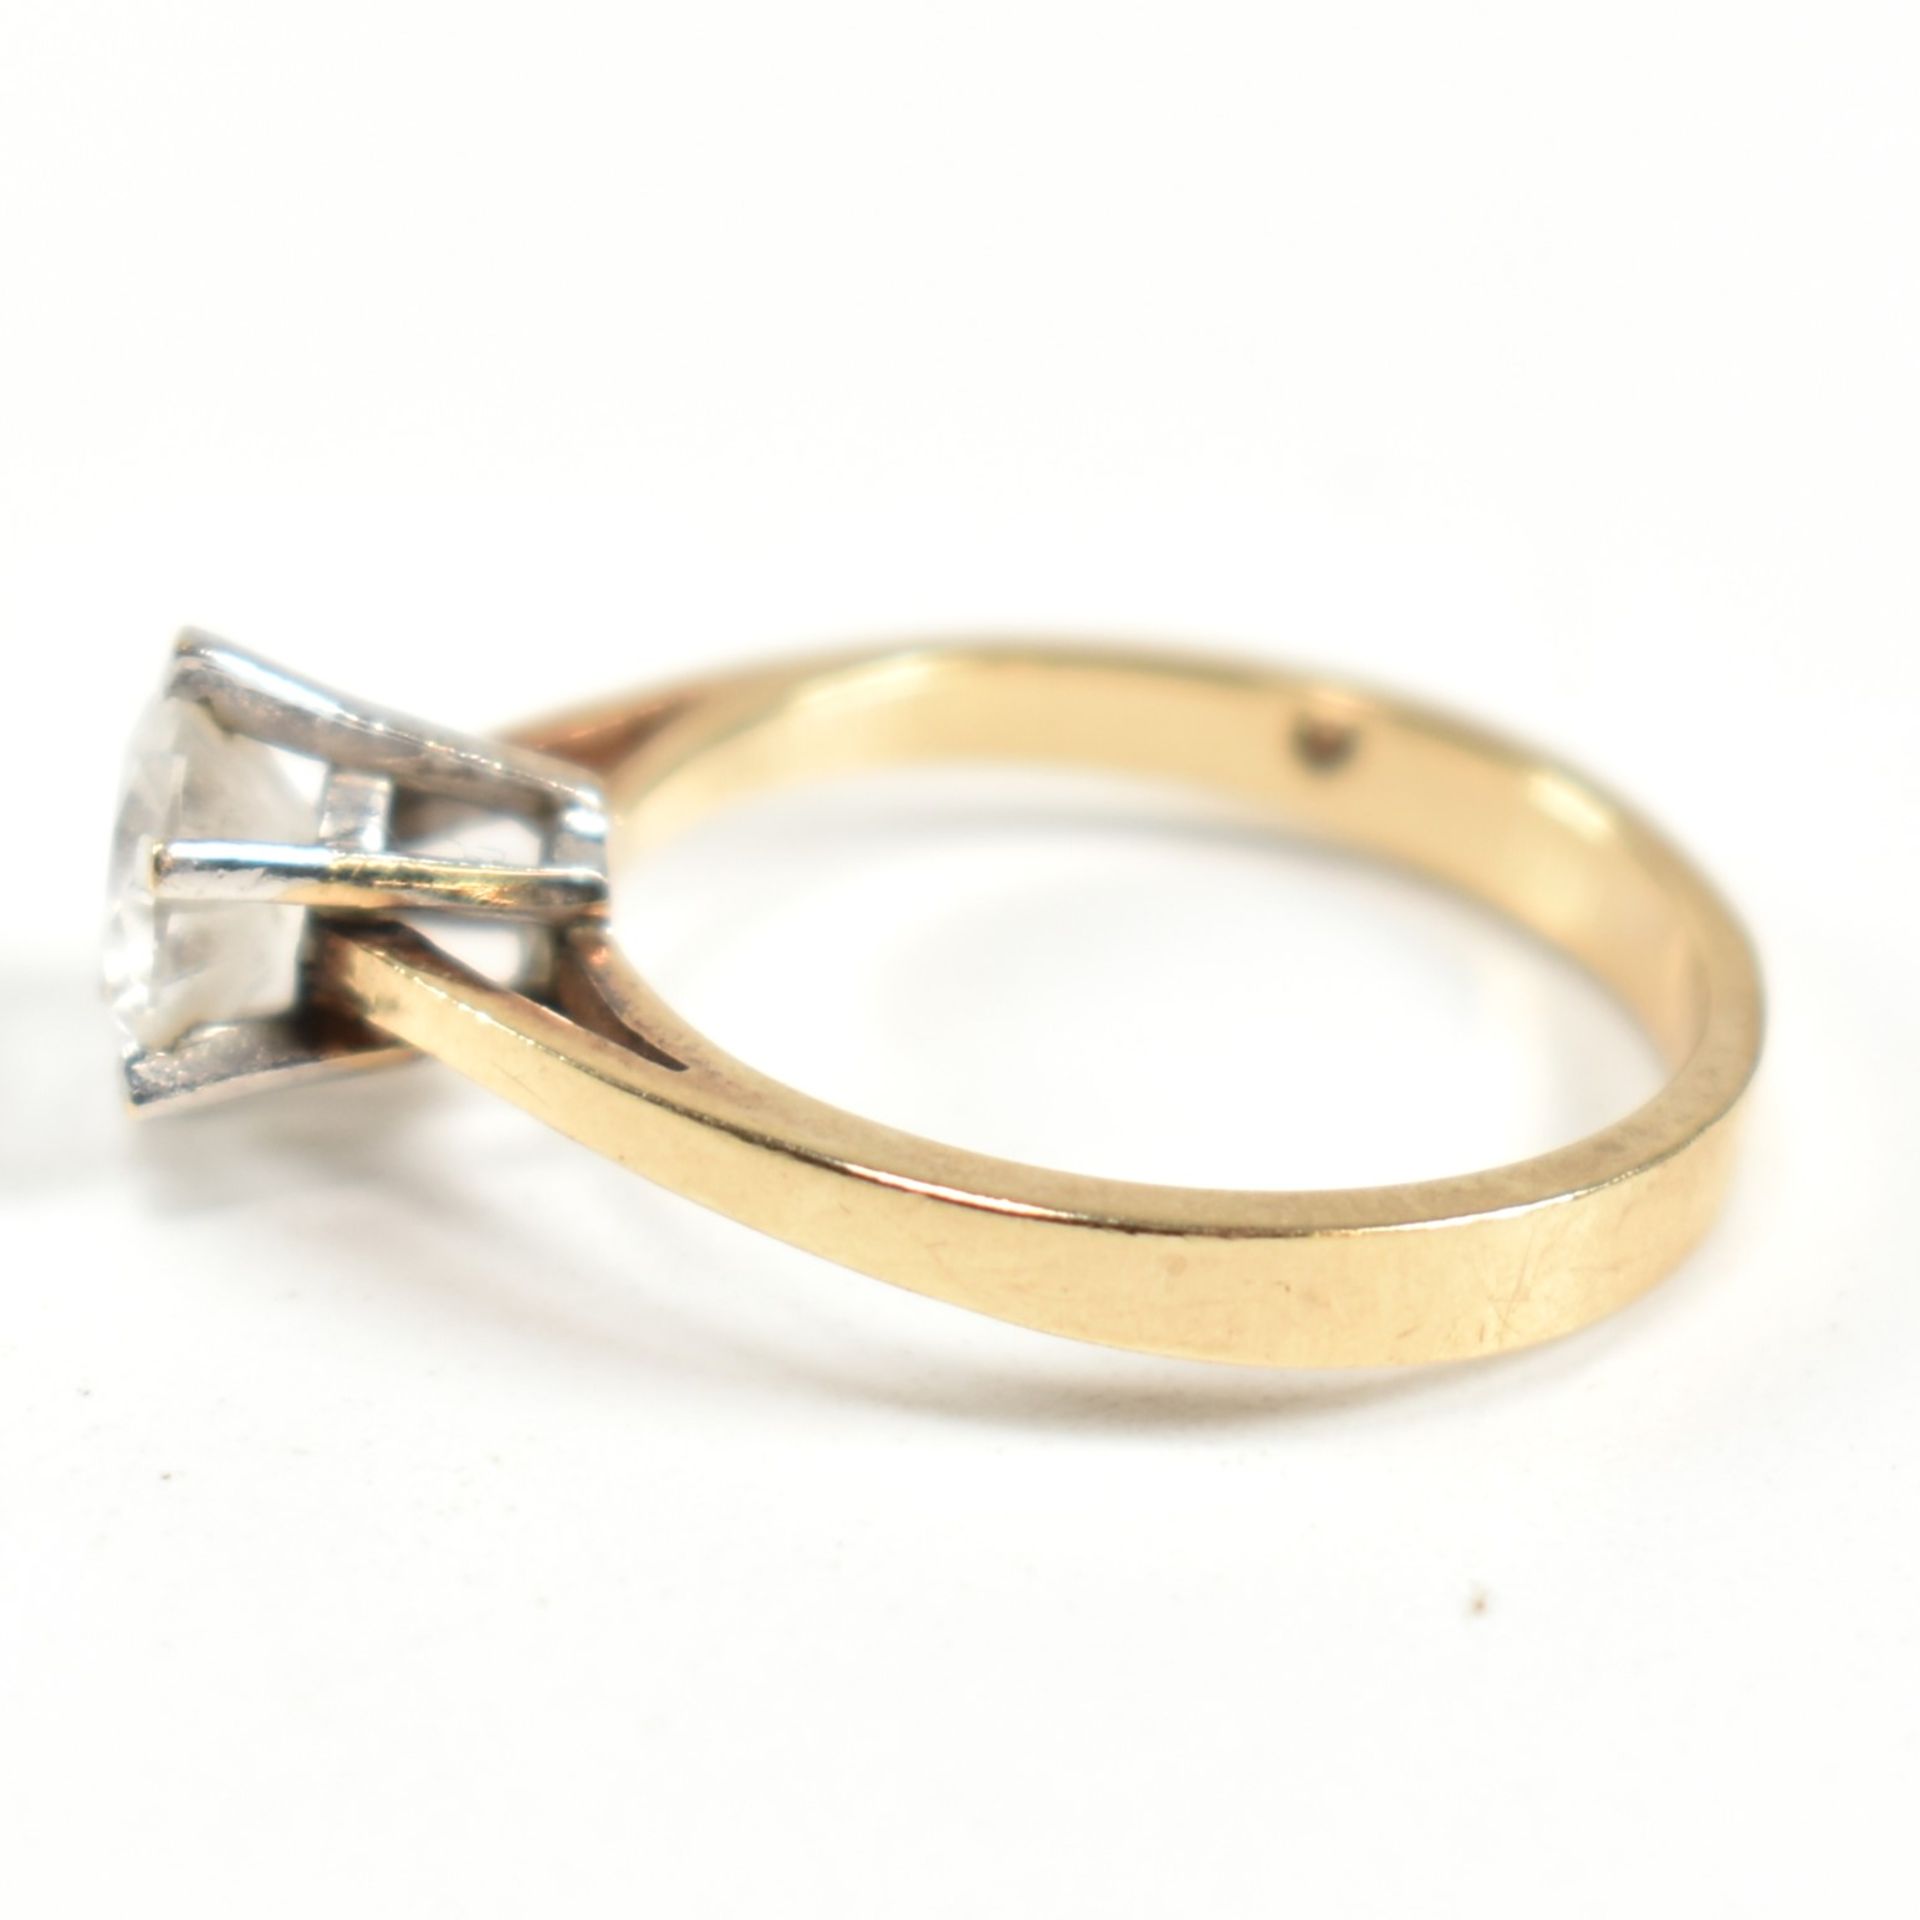 HALLMARKED 9CT GOLD & CZ SOLITAIRE RING - Image 7 of 8